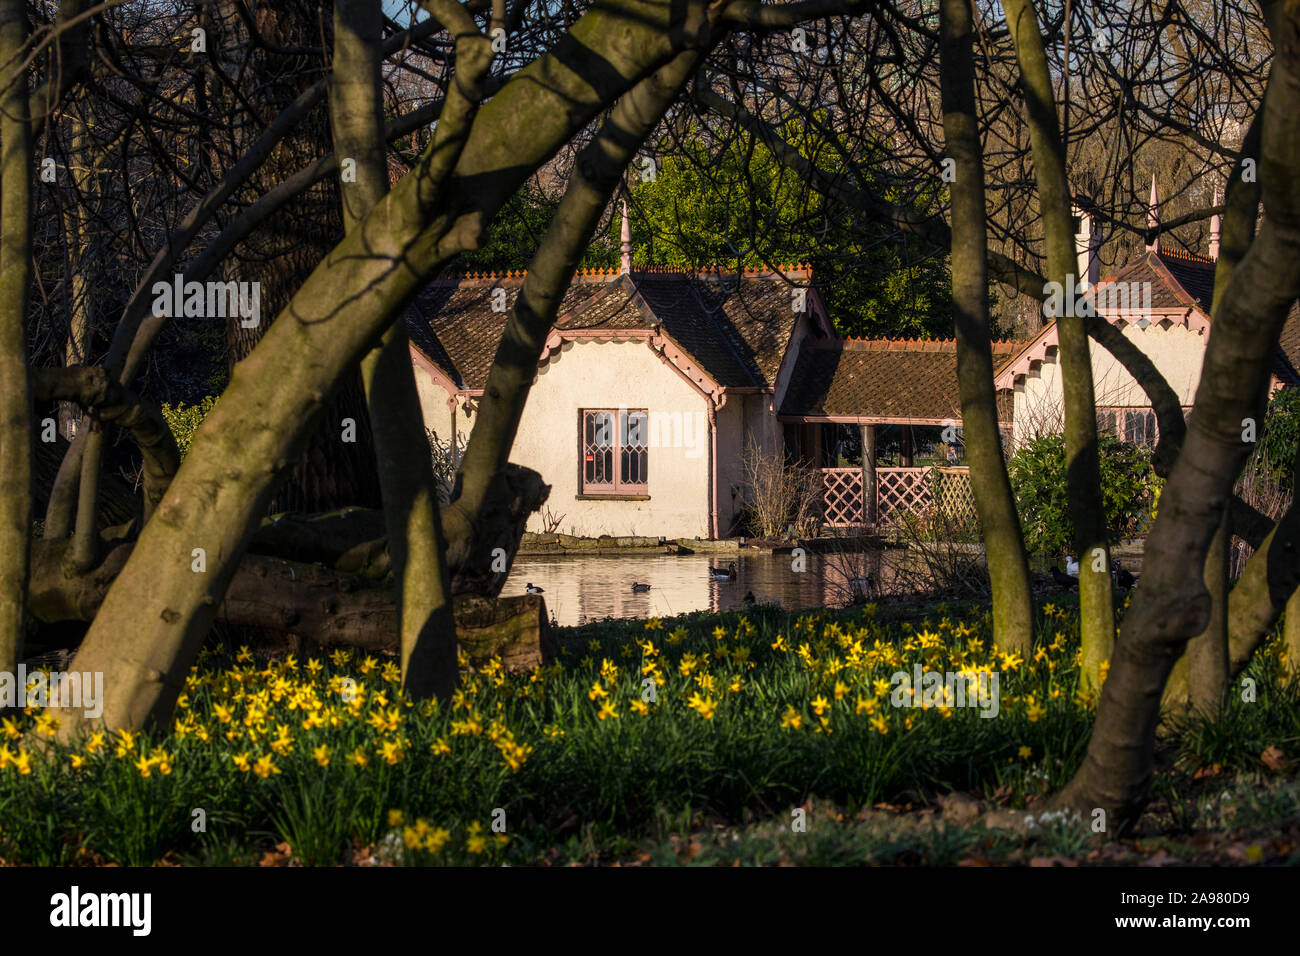 A view across the Daffodils and through the foliage of Duck Island Cottage in the beautiful St. James’s Park in London, UK. Stock Photo